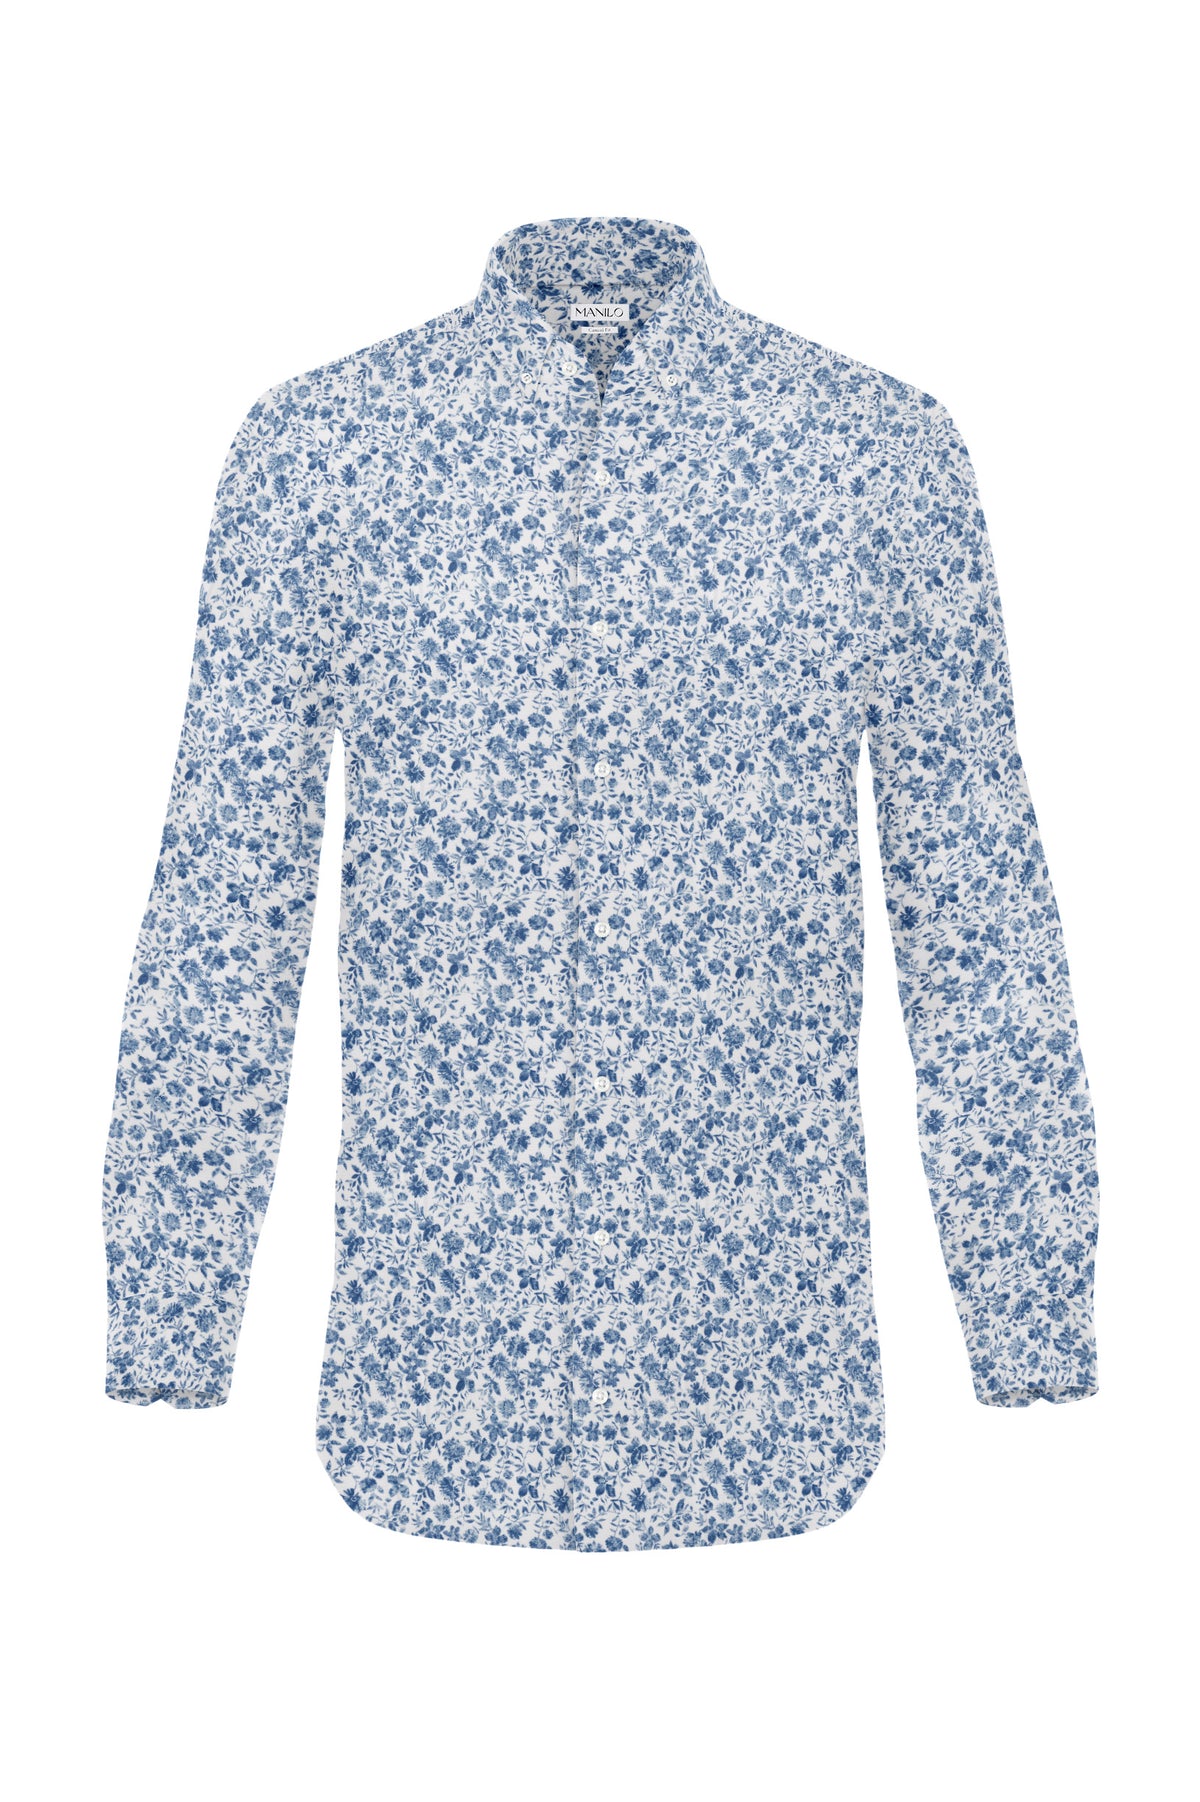 Printed casual shirt with floral pattern in white/blue (Art. 2104-C)